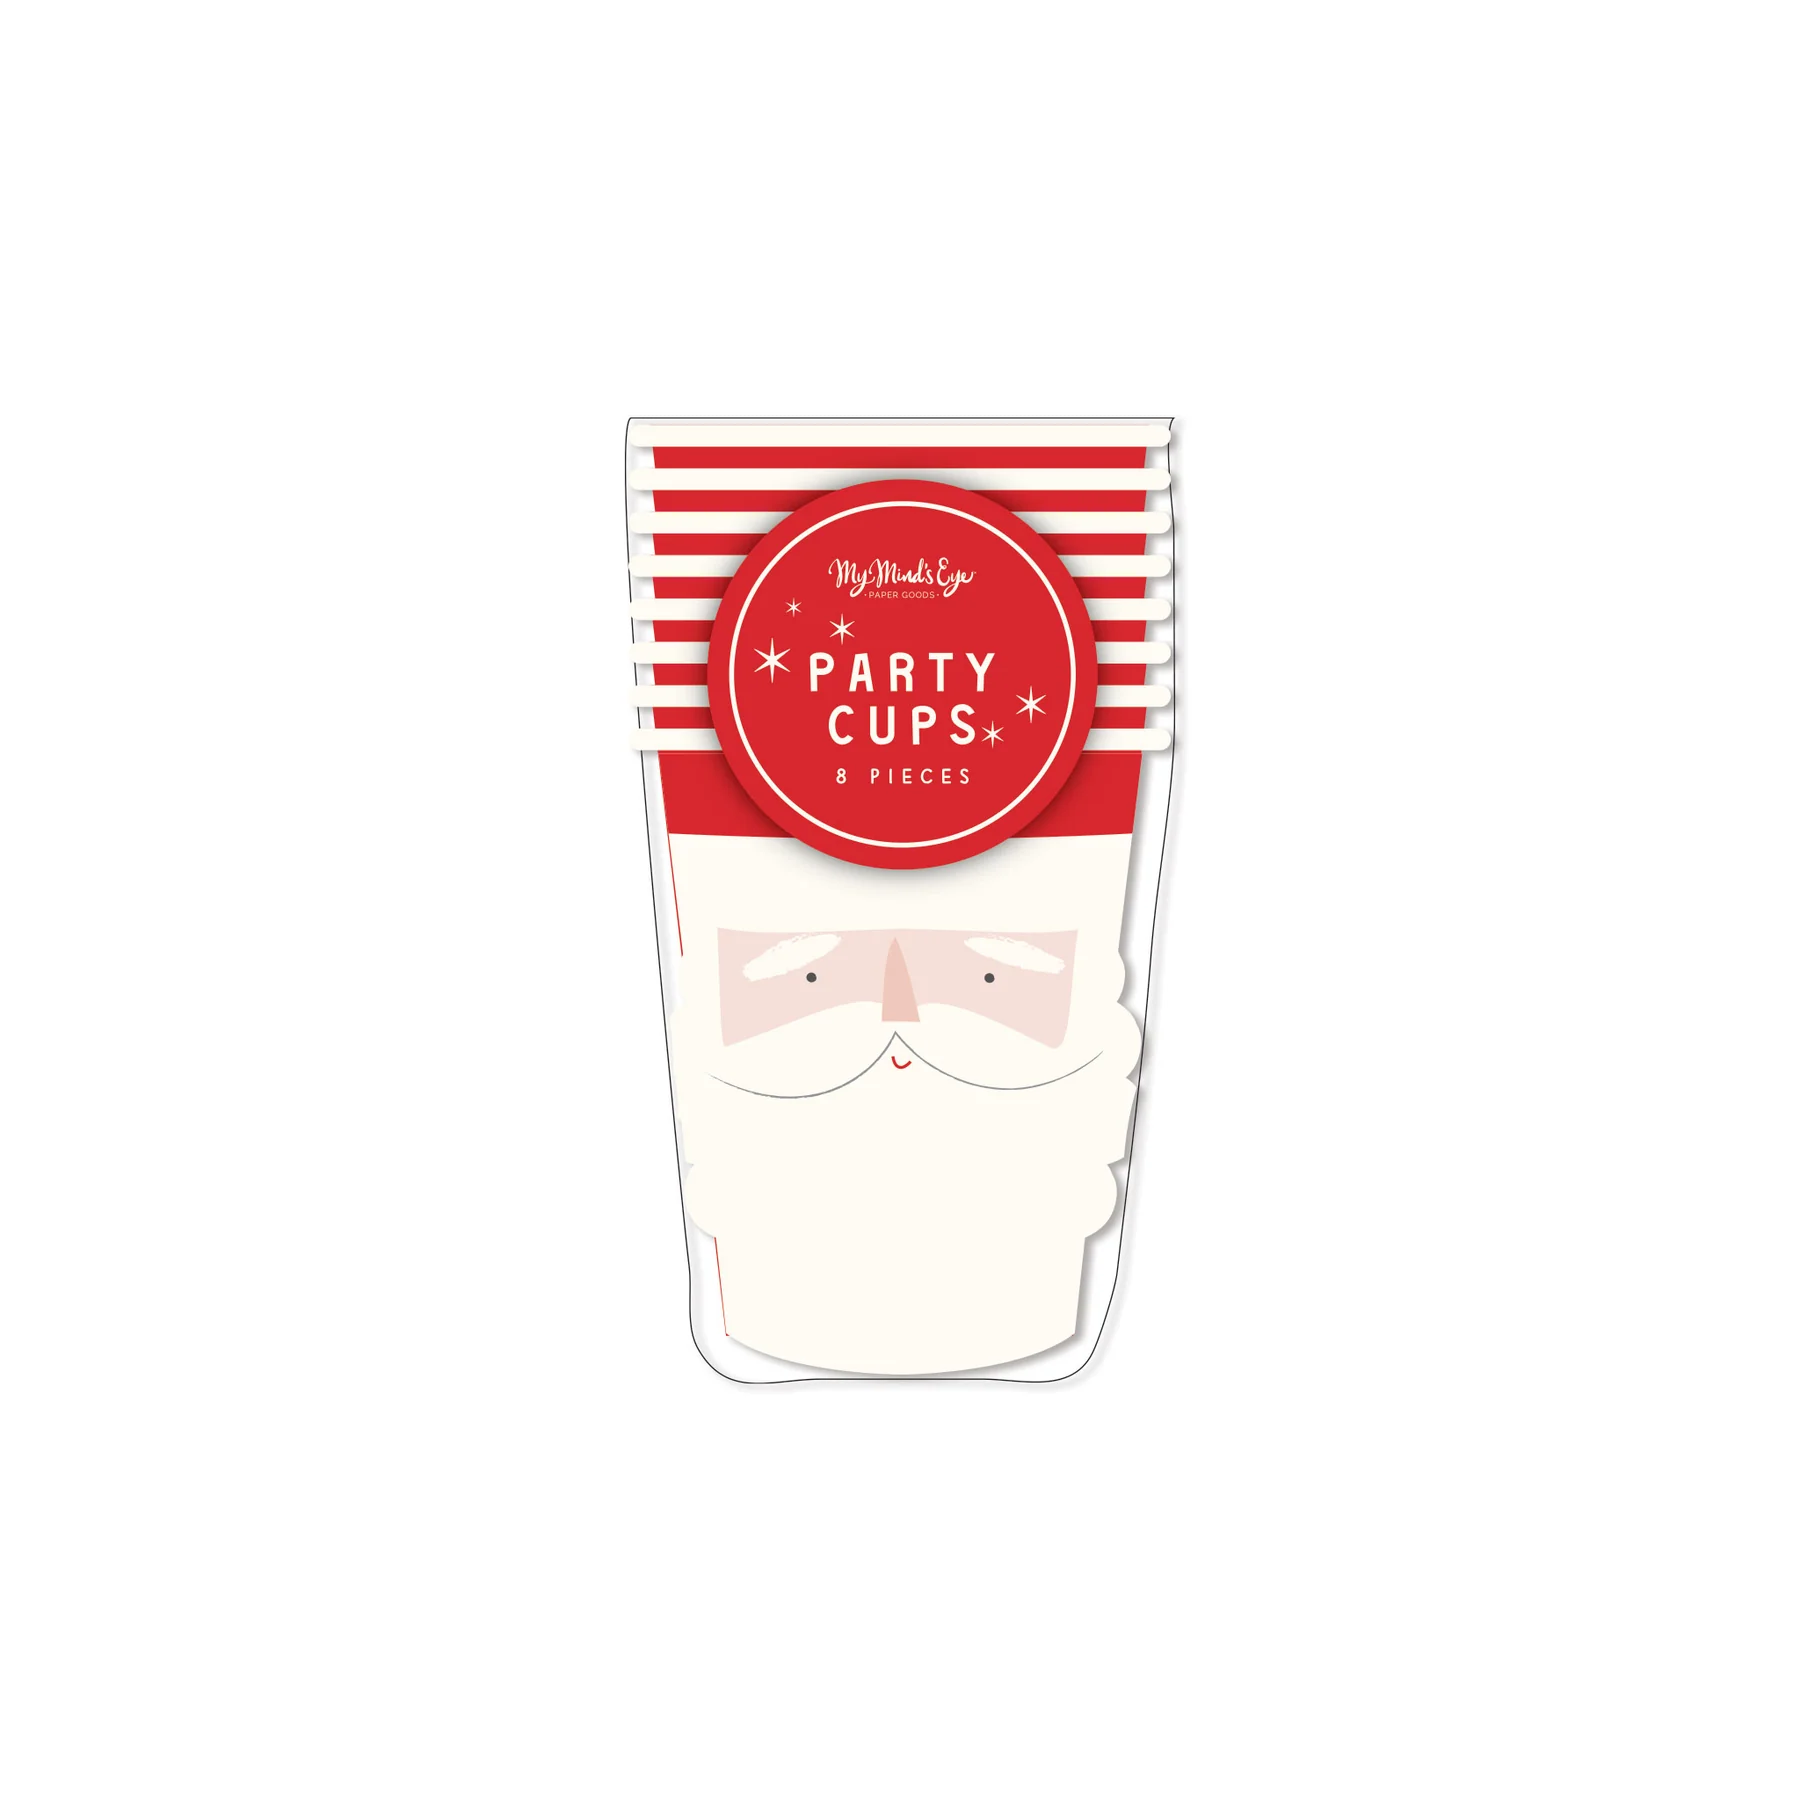 PRESALE SHIPPING MID OCTOBER - BEC1012 - BELIEVE SANTA FACE WITH HANDLE PAPER PARTY CUP